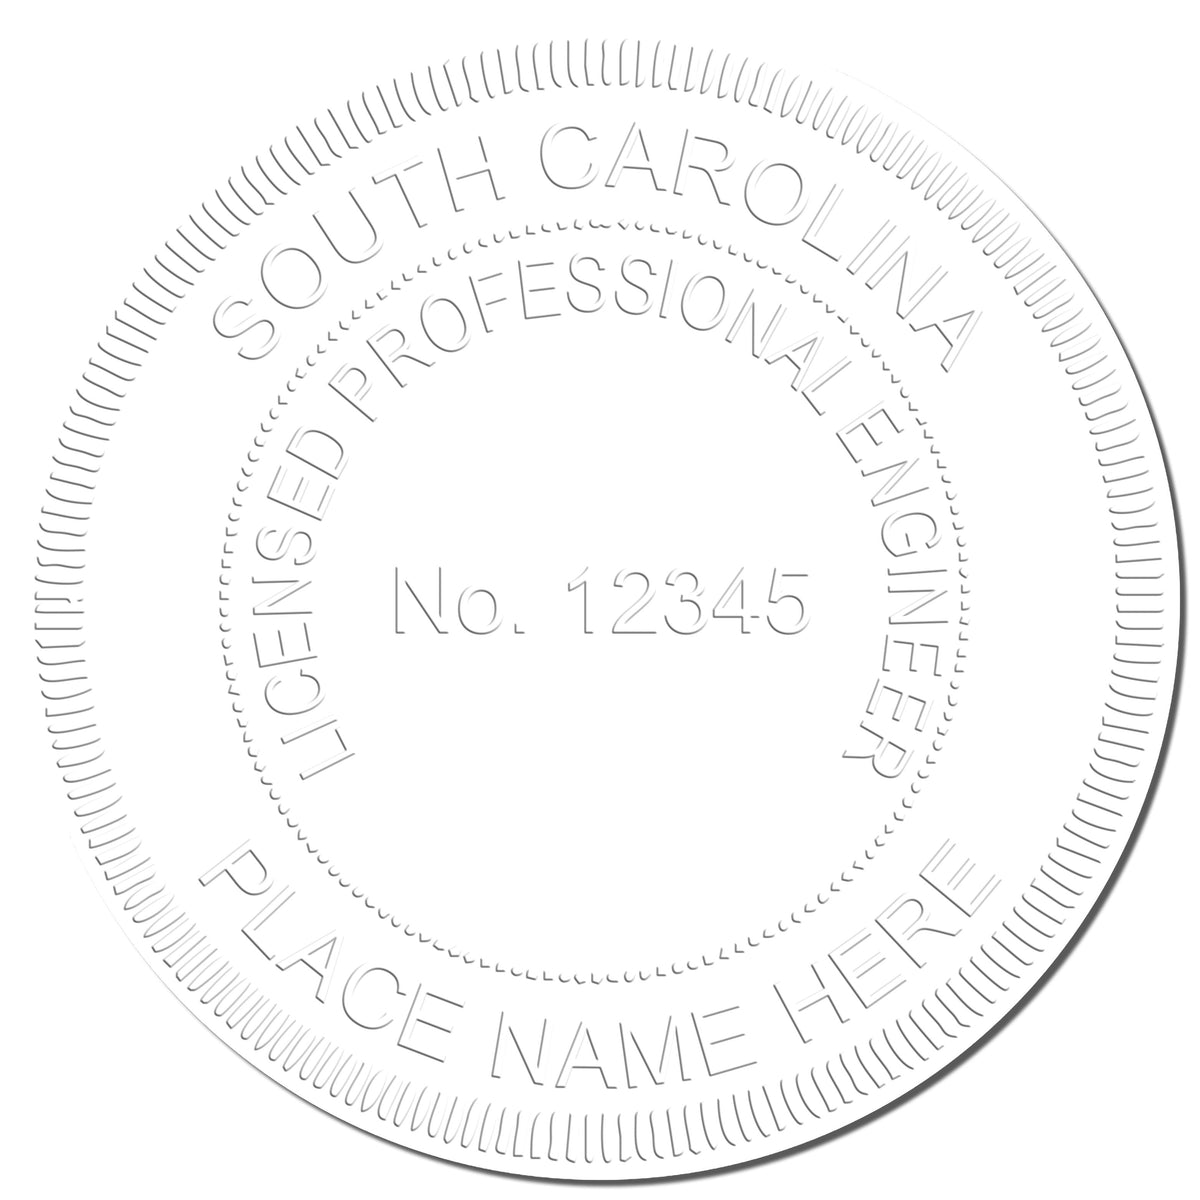 The Long Reach South Carolina PE Seal stamp impression comes to life with a crisp, detailed photo on paper - showcasing true professional quality.